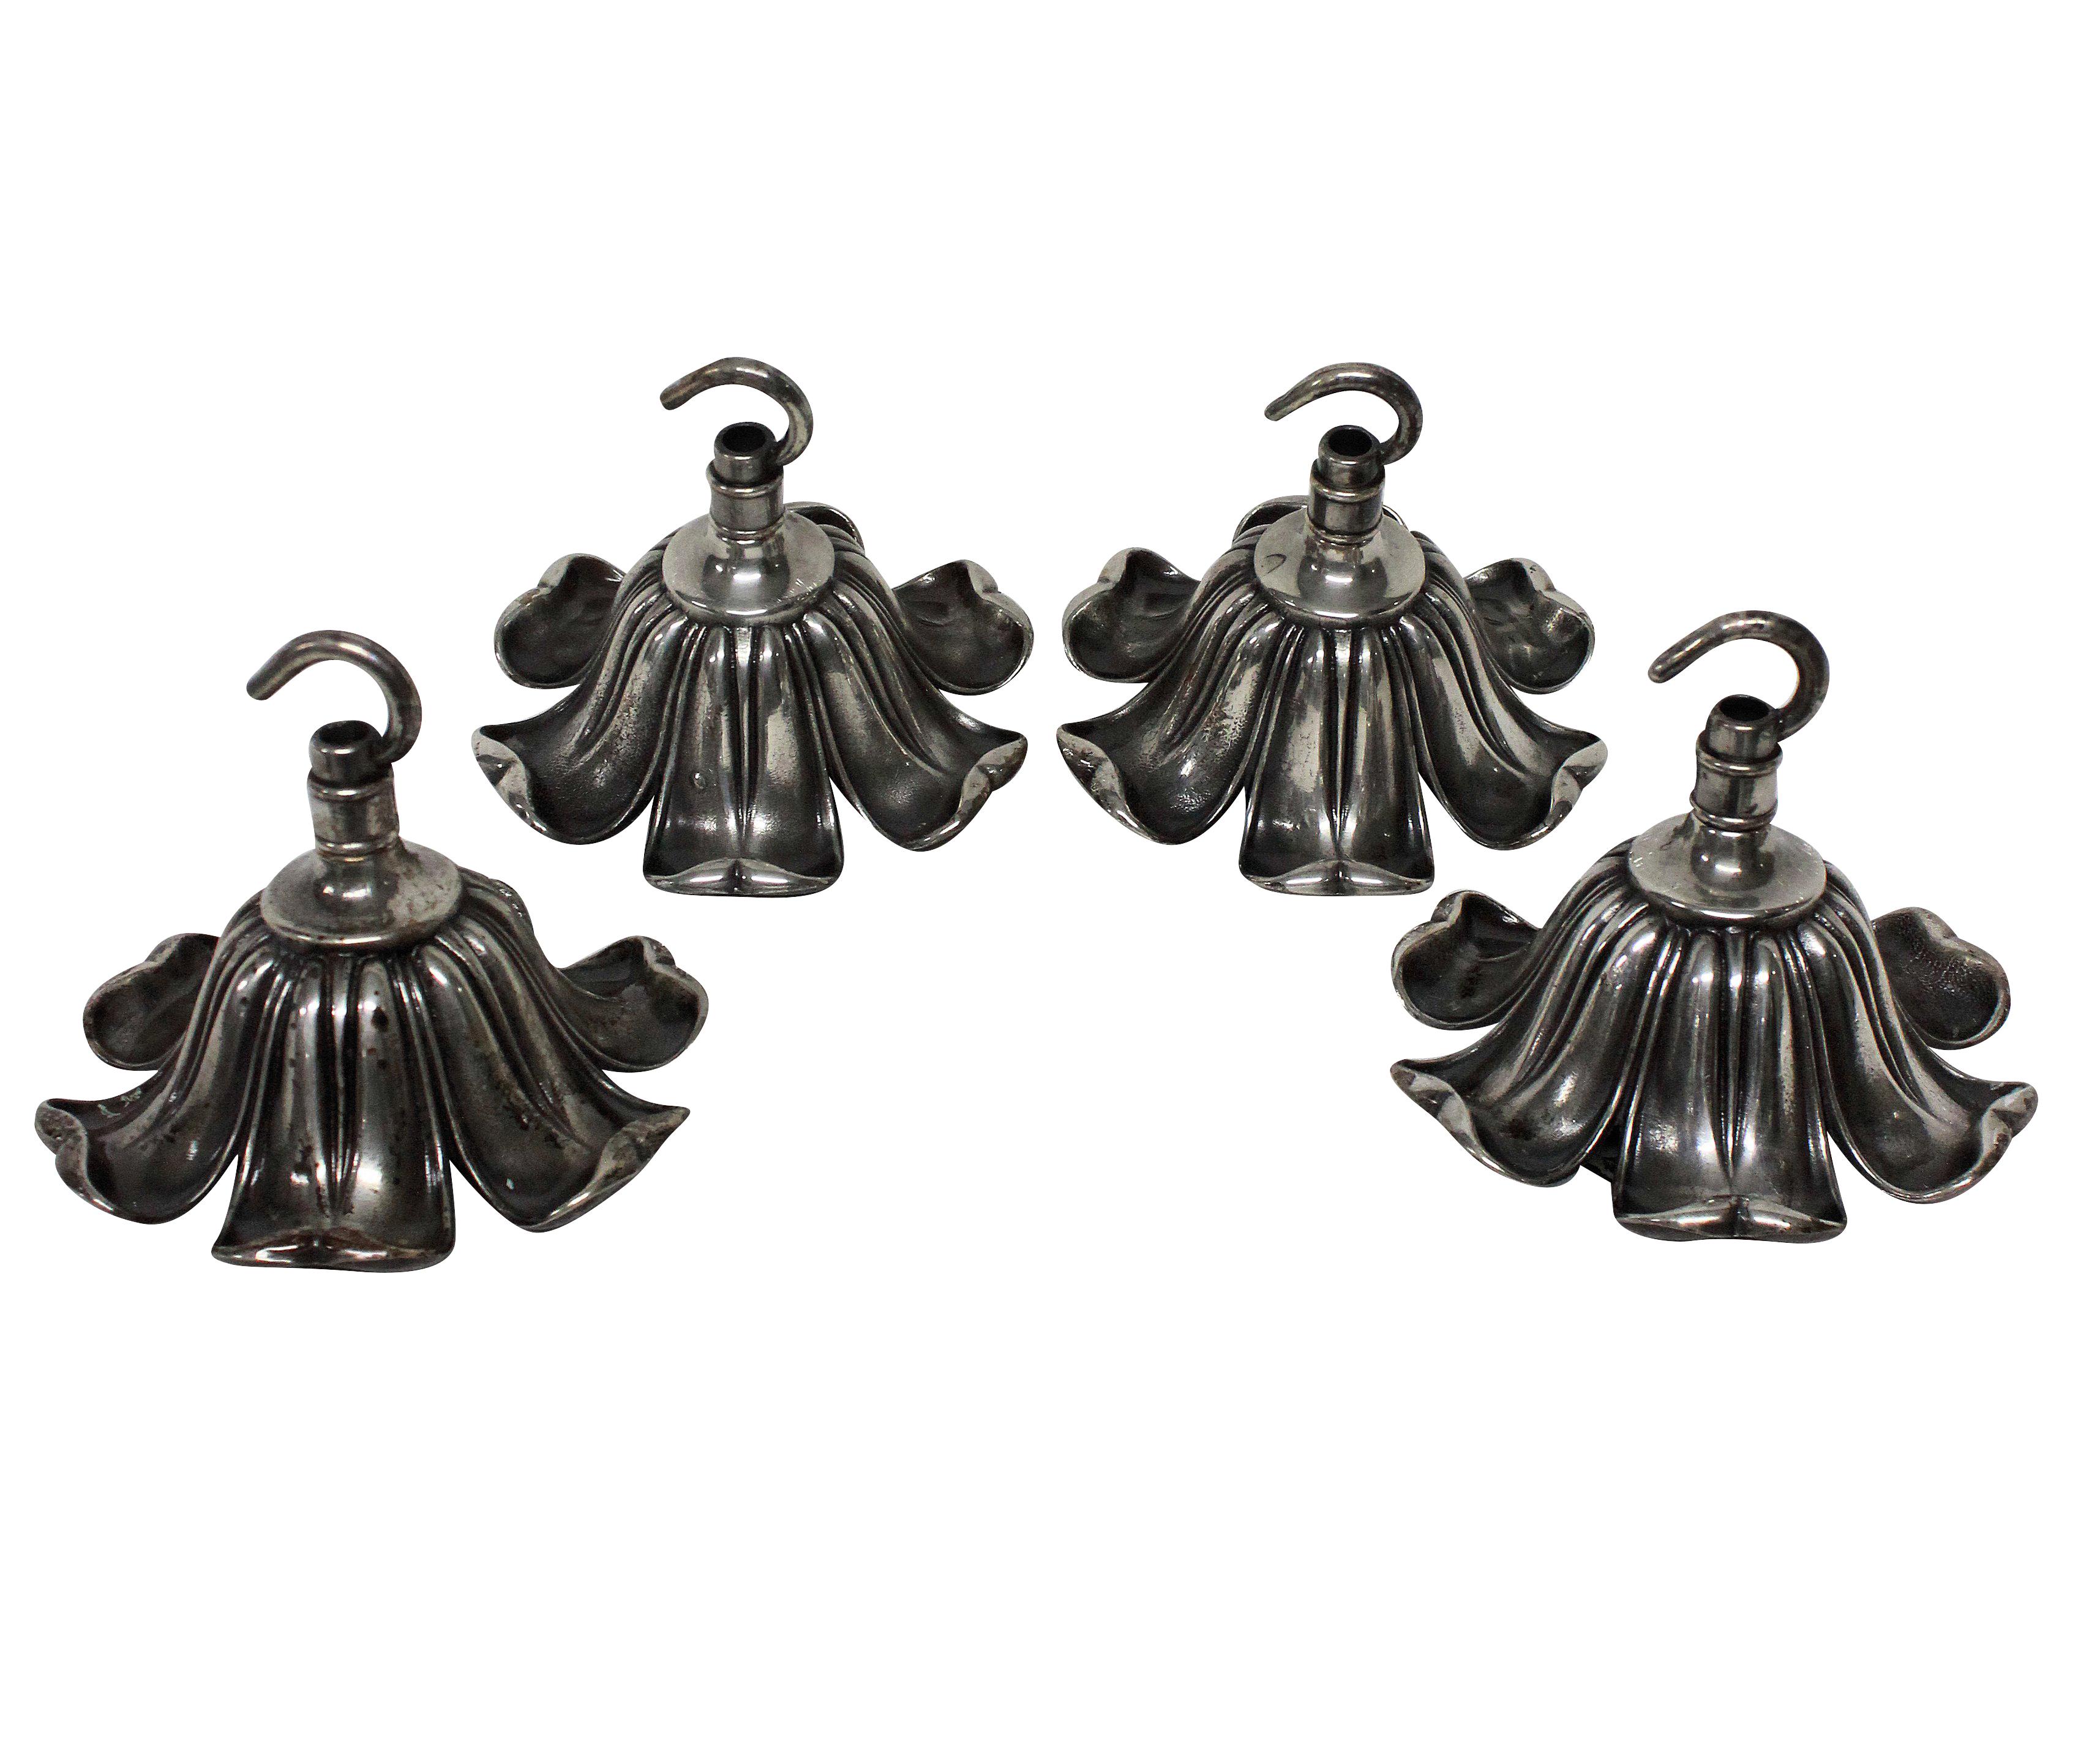 A set of four matching silver plated chandelier ceiling hooks.